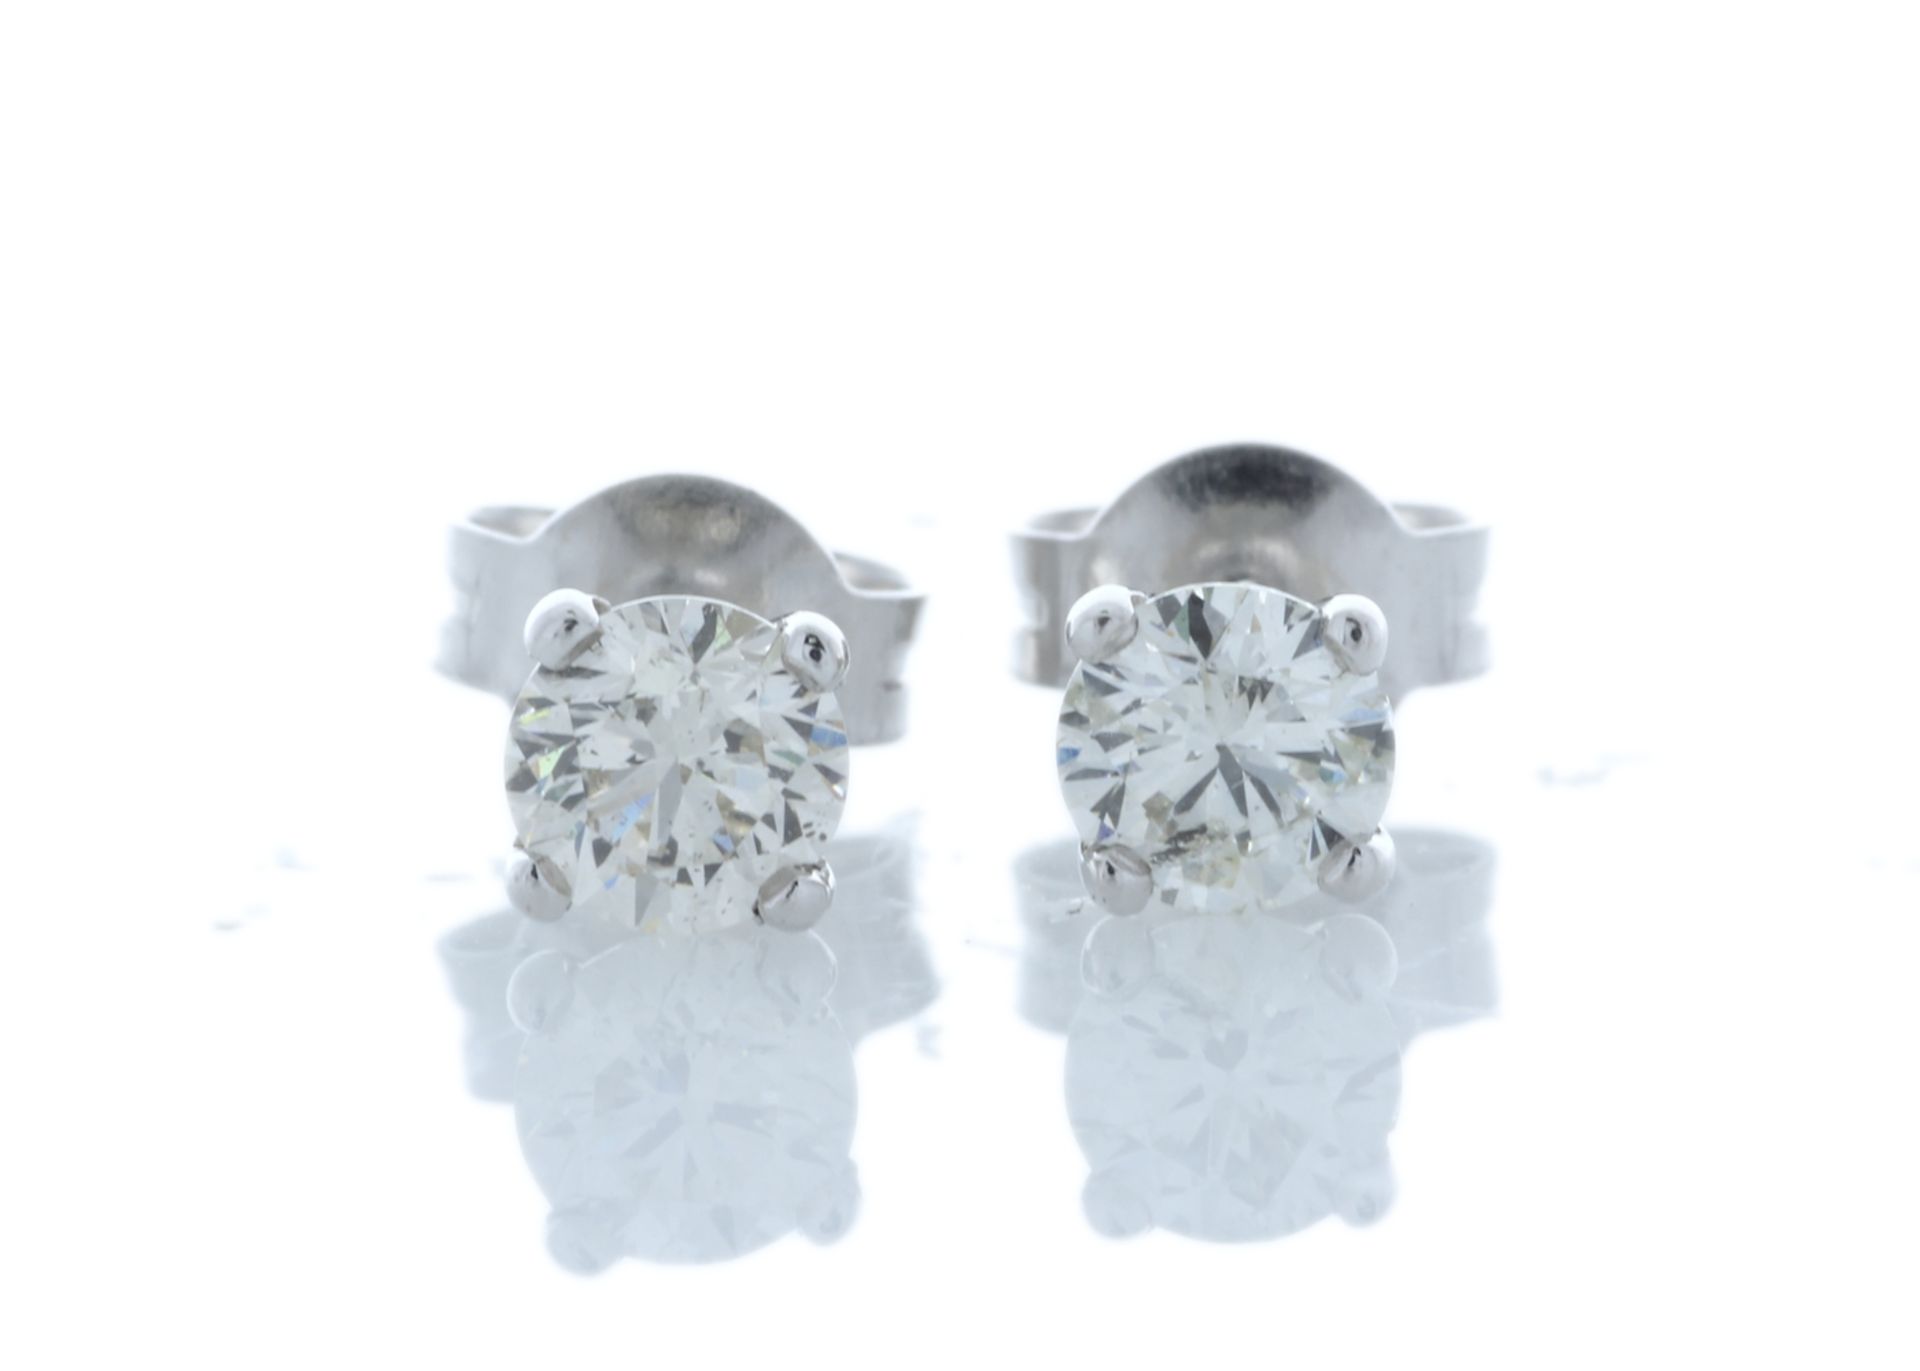 18ct White Gold Single Stone Wire Set Diamond Earring 0.80 Carats - Valued by GIE £14,590.00 -